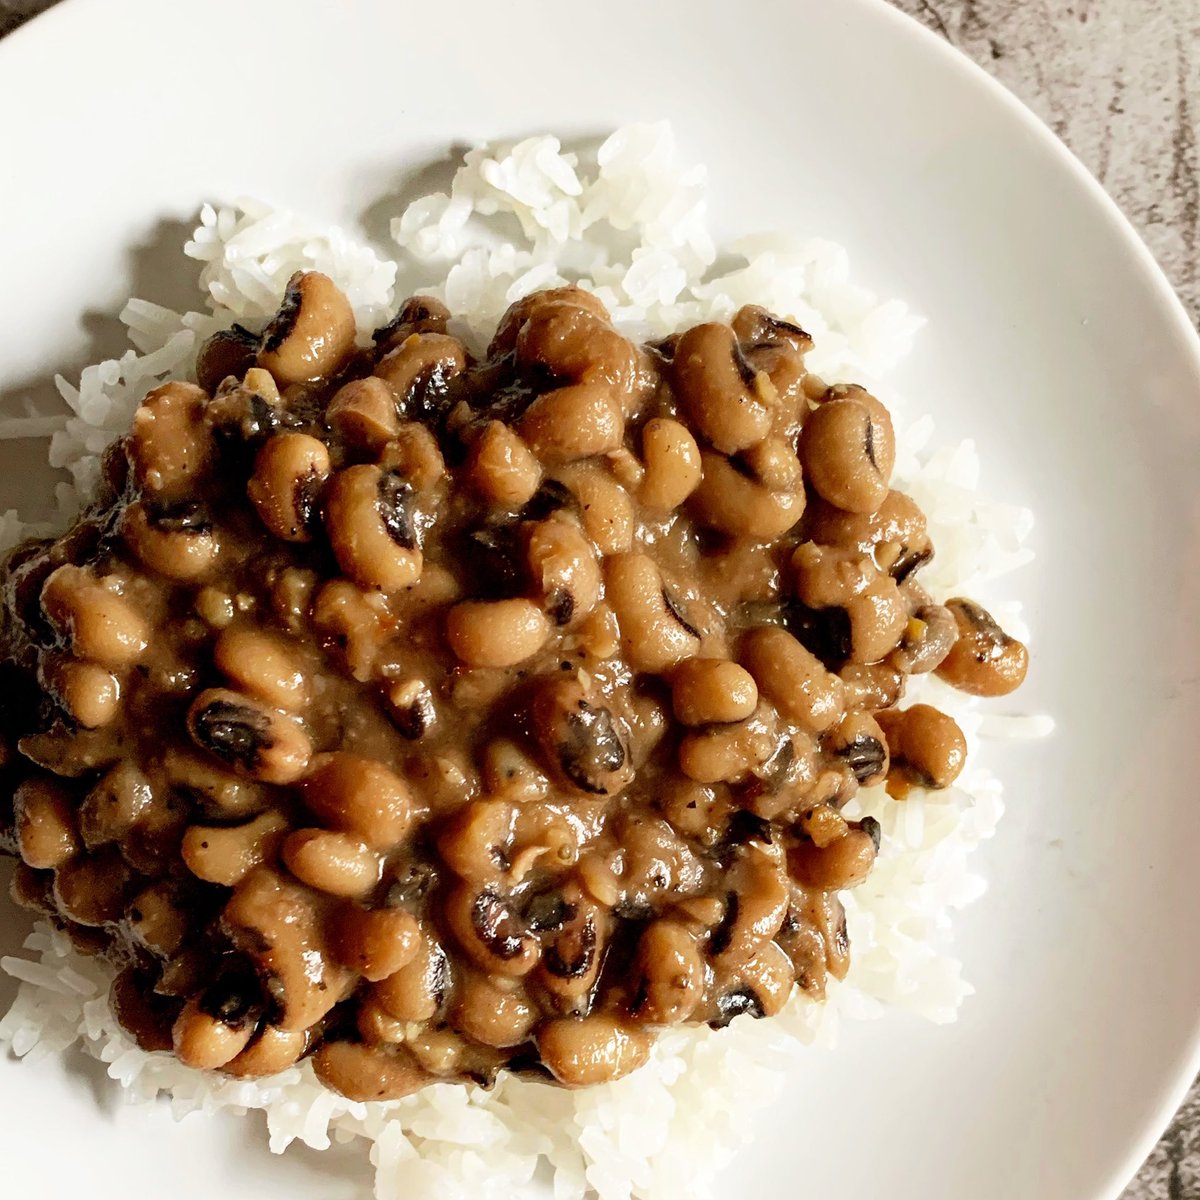 Instant Pot Black-eyed Peas recipe for all of us who love black-eyed peas year round, not only on New Year’s Eve.  https://whereshebegins.com/plant-based-bre/2020/10/22/black-eyed-peas-two-ways